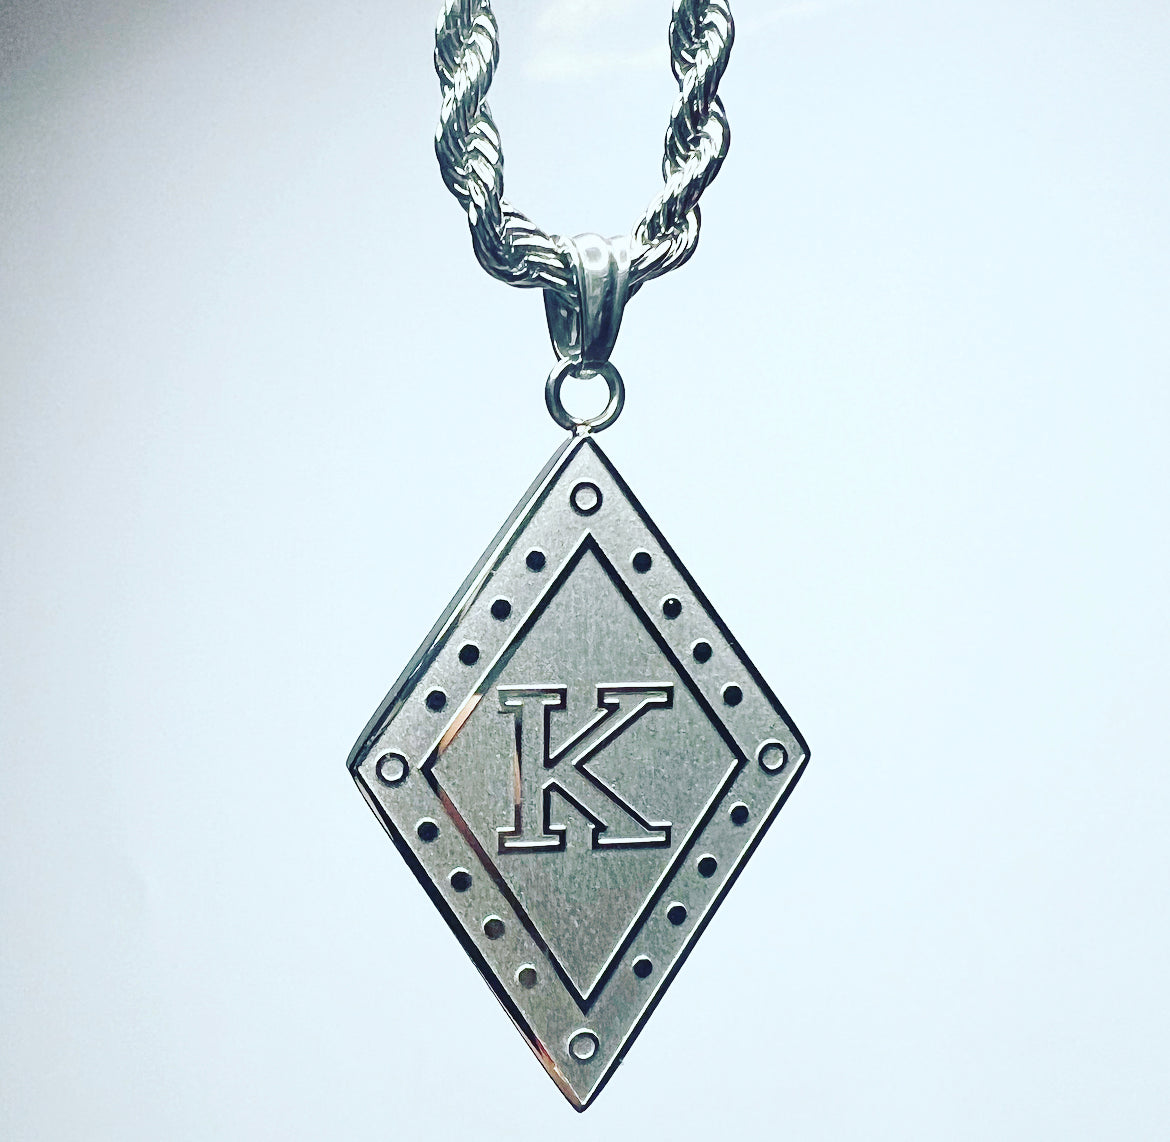 A beyond stunning Kappa Alpha Psi necklace and charm made with 24k stainless steel silver. This pendant is made to last for generations and generations, perfect for that special Kappa Alpha Psi member. The ultimate gift to show off your fraternity pride is here!  • Official Kappa Alpha Psi Licensed Product: passed through examination and requirements by the Fraternity as a whole.